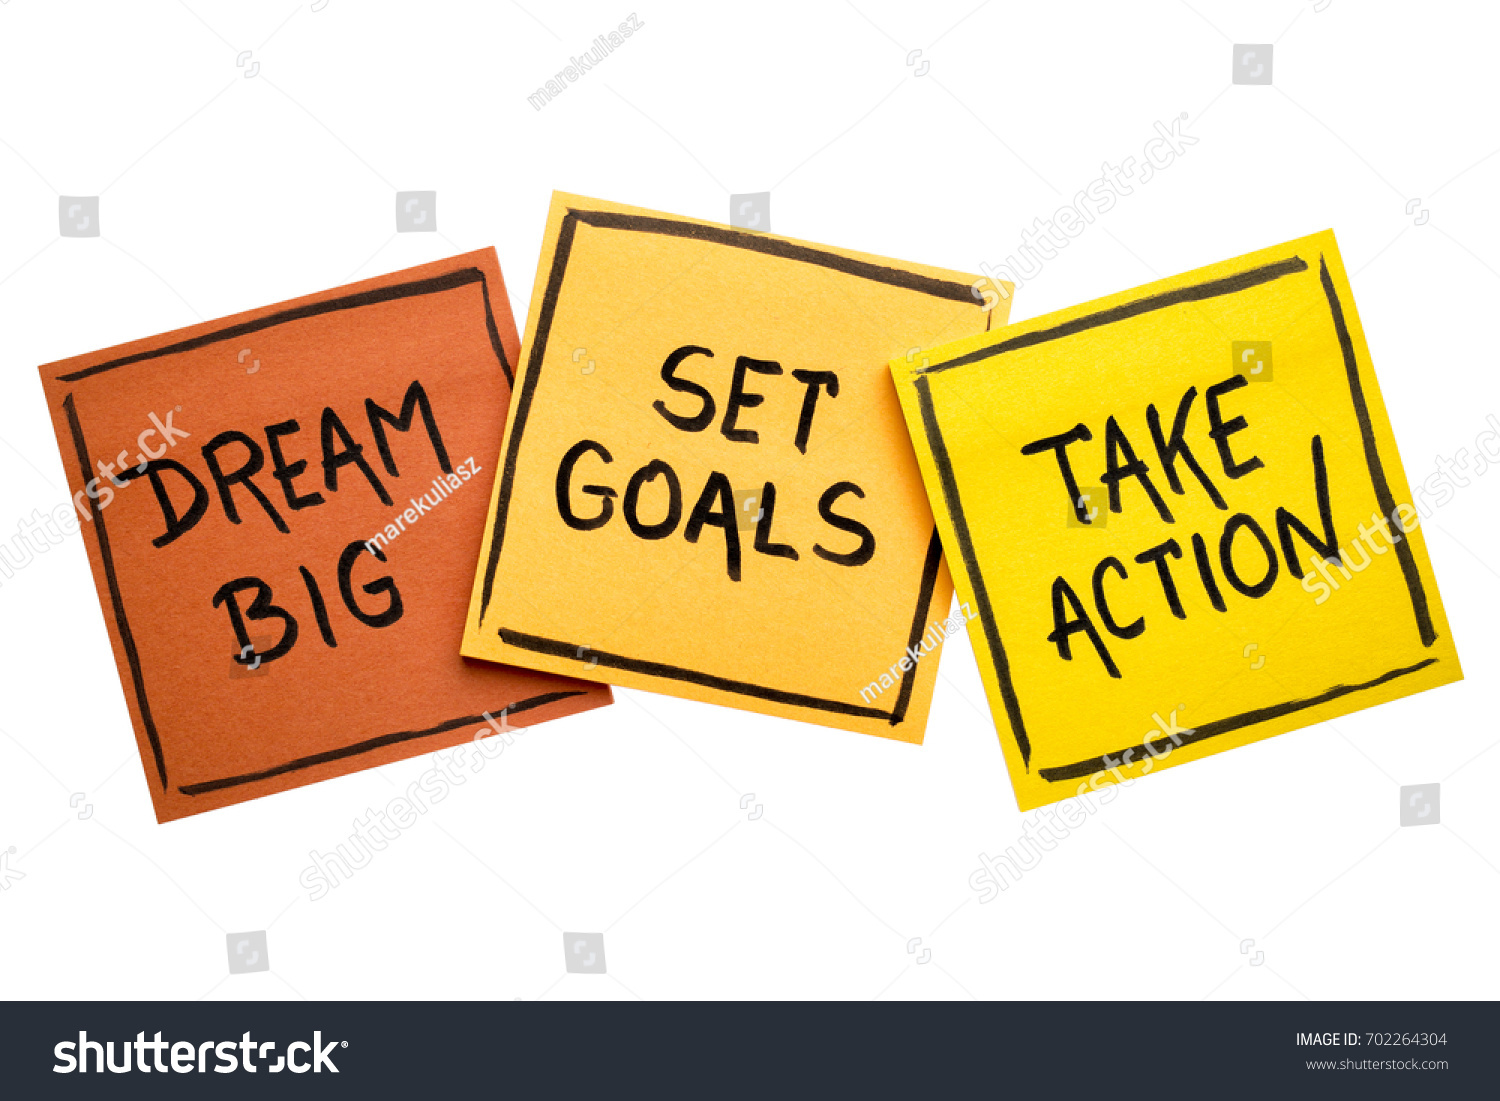 dream big, set goals, take action concept - motivational advice or reminder on colorful sticky notes isolated on white #702264304